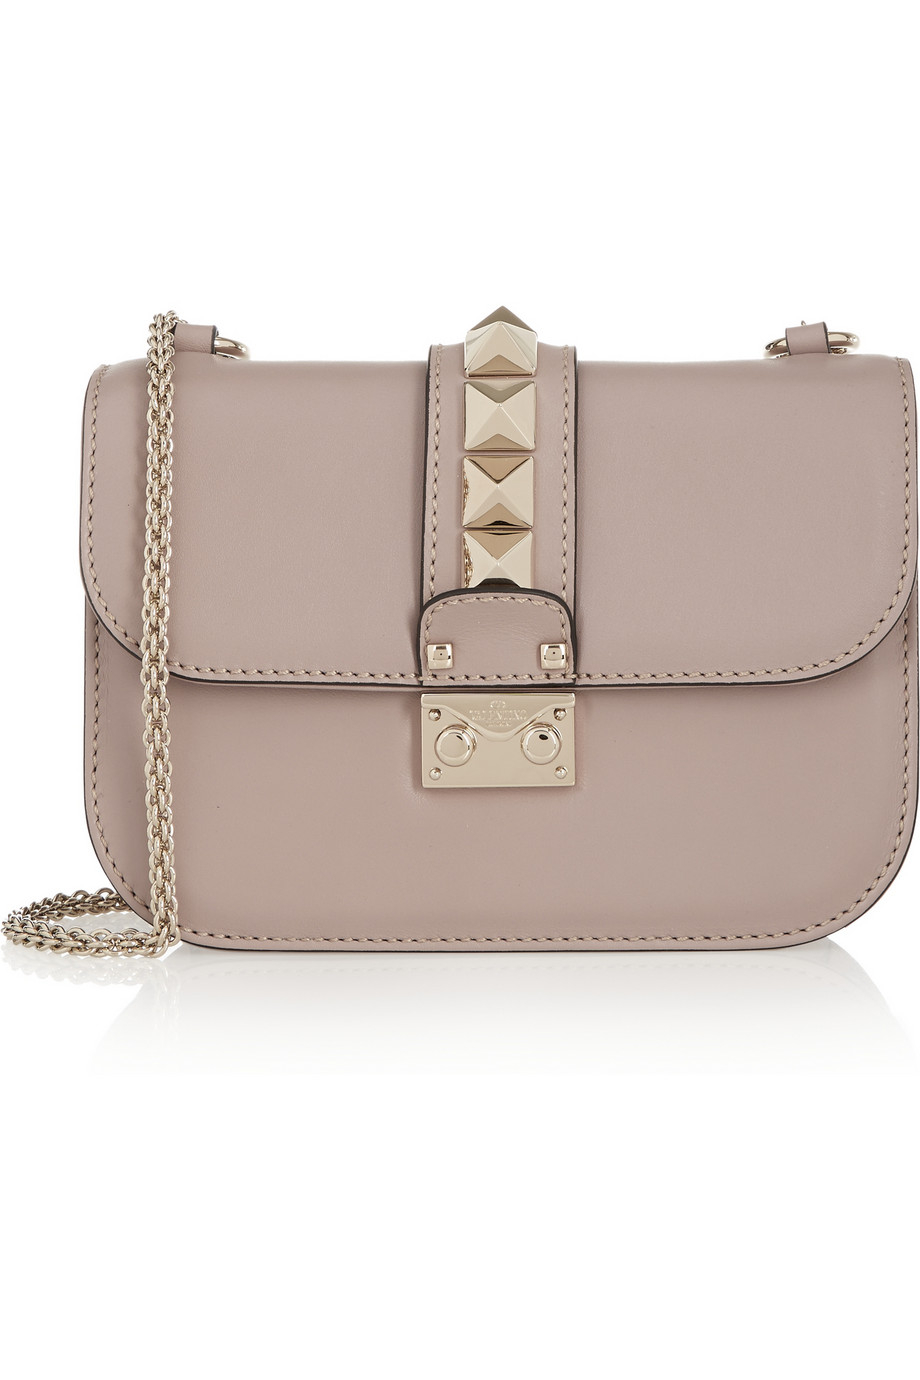 Valentino Lock Small Leather Shoulder Bag in Beige (blush) | Lyst